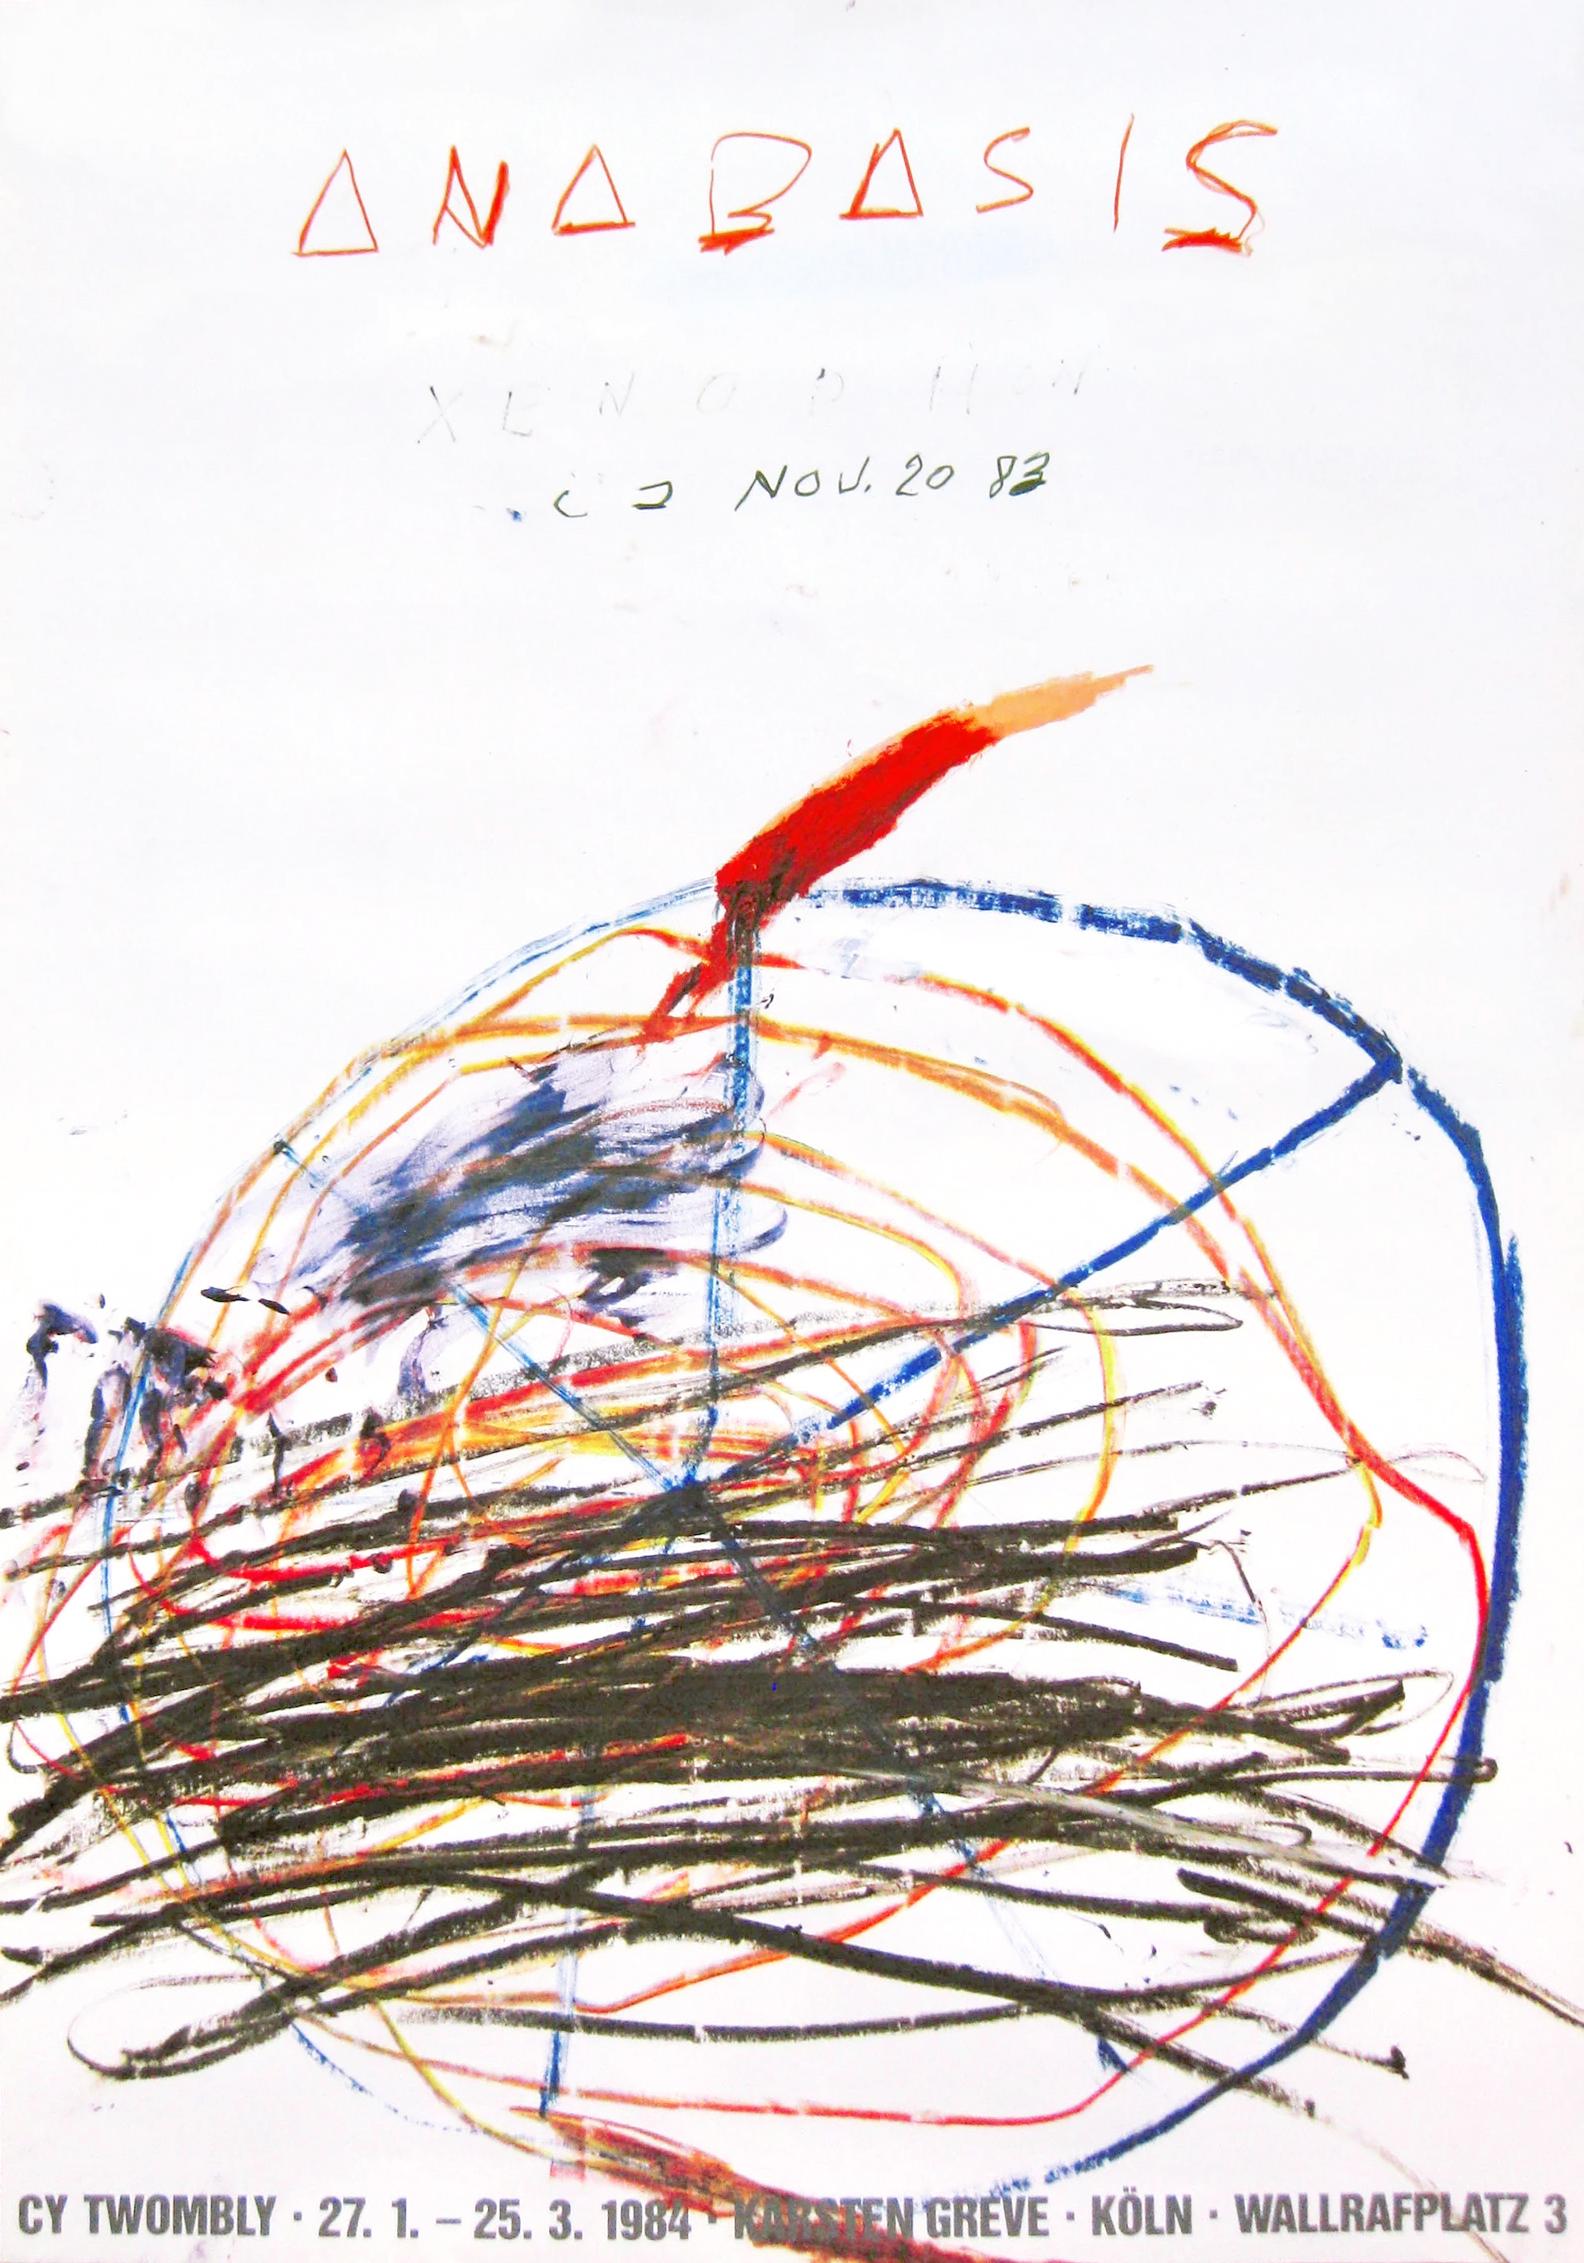 Vintage Exhibition Poster Galerie Karsten Greve, Cologne 1984  - Print by Cy Twombly